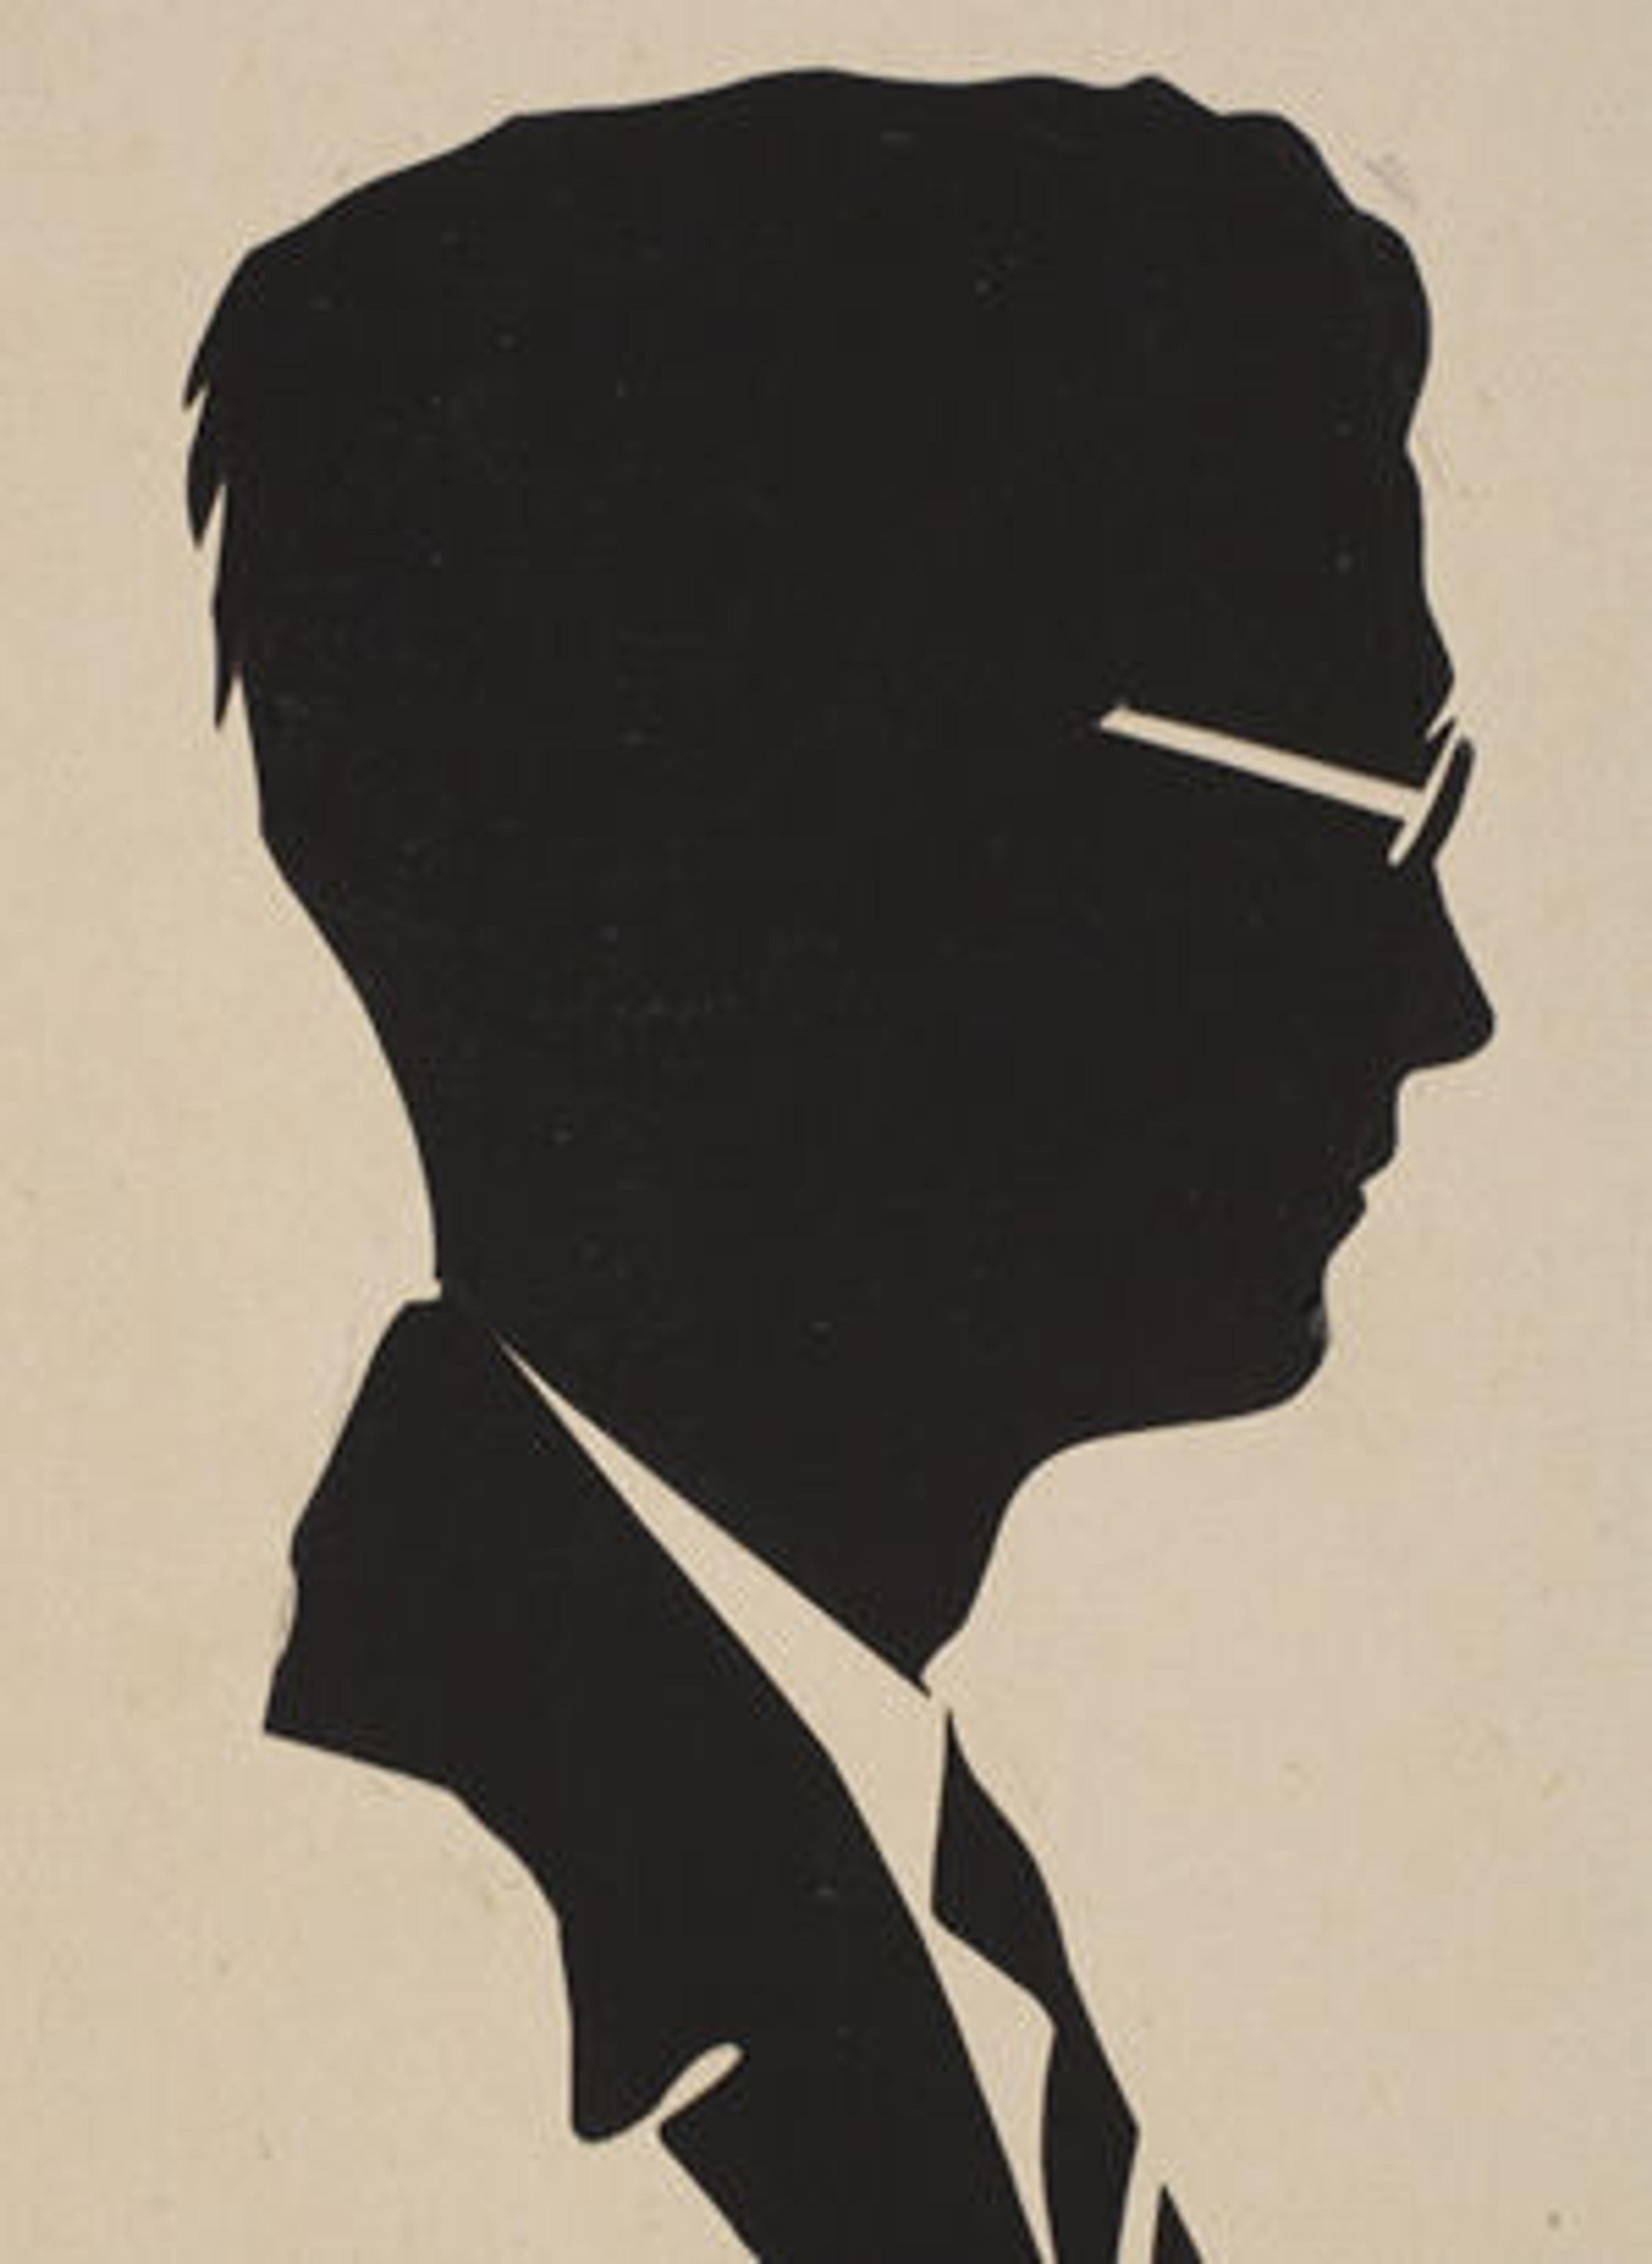 Gonslar (American, 20th century). Portrait of Jefferson R. Burdick from the Chicago World's Fair, 1933. Silhouette; approx.: 4 1/8 x 1 3/4 in. (10.4 x 4.5 cm). The Metropolitan Museum of Art, New York, The Jefferson R. Burdick Collection, Gift of Jefferson R. Burdick (Burdick.silhouette)